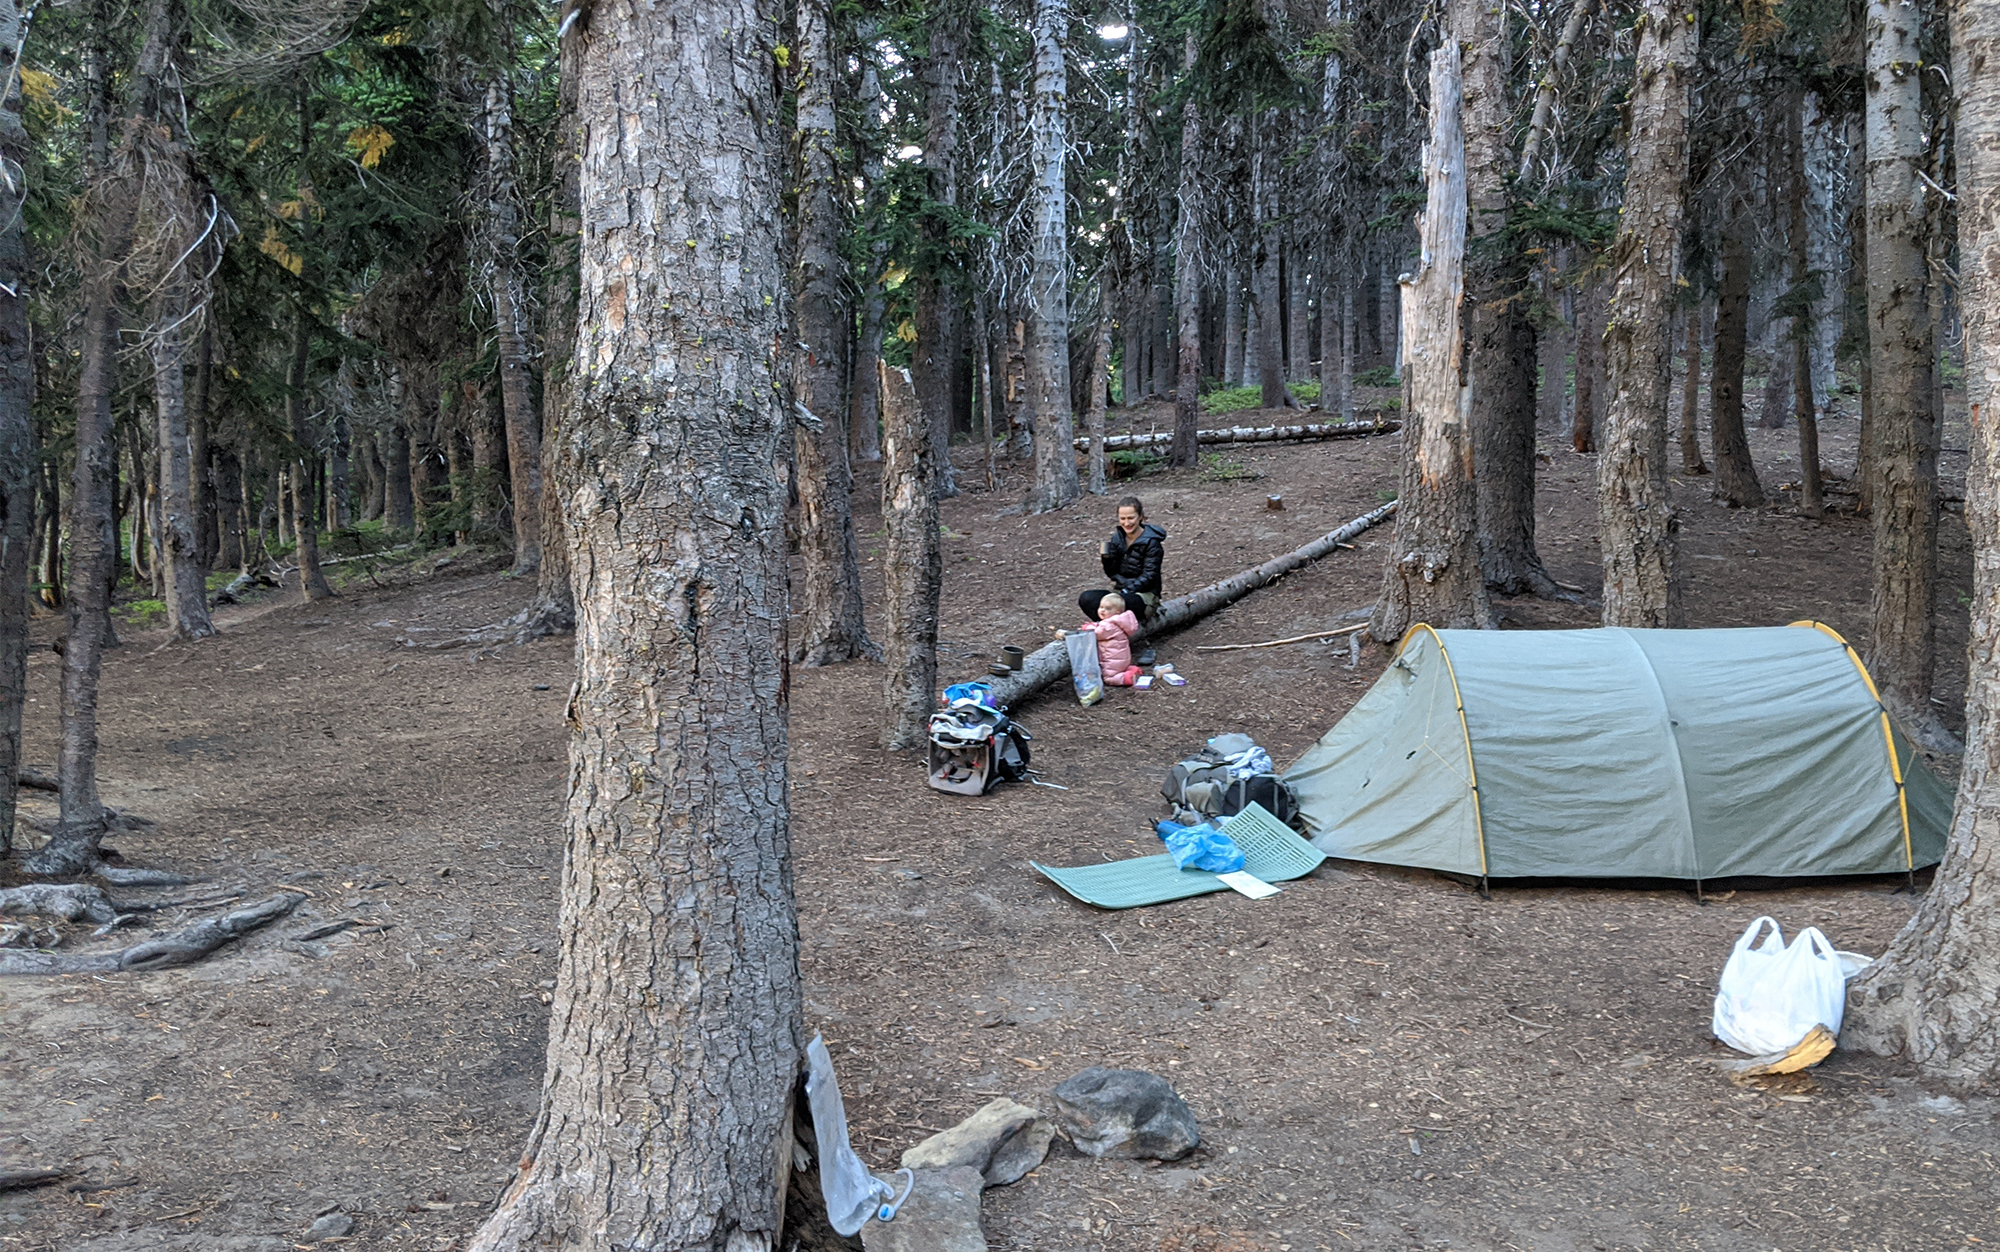 Camping with a one-year-old in Washington's Chiwaukum Mountains.